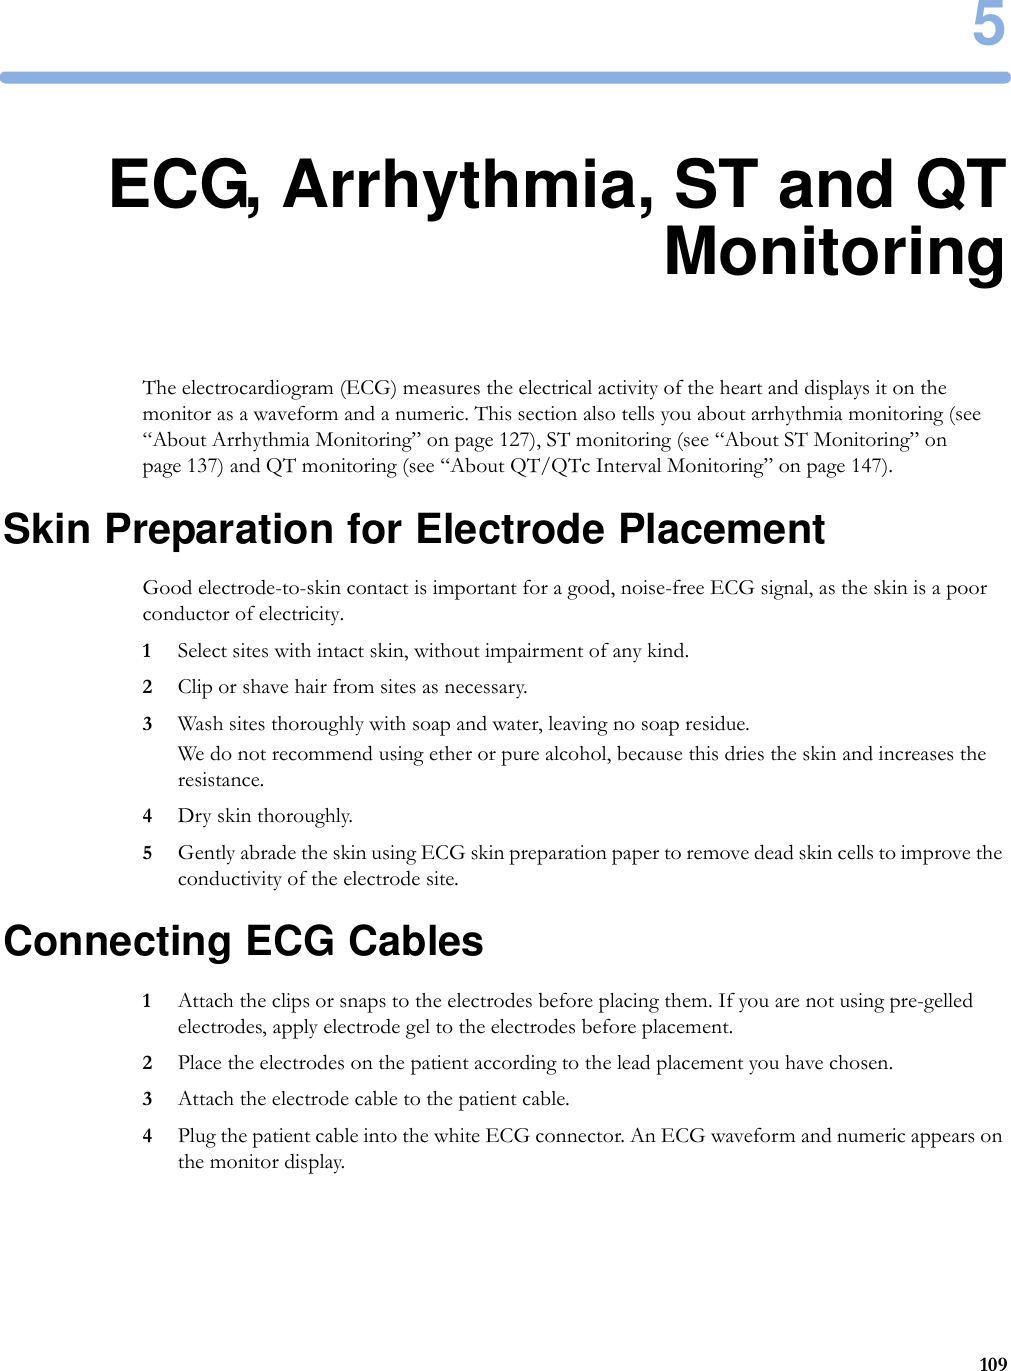 51095ECG, Arrhythmia, ST and QTMonitoringThe electrocardiogram (ECG) measures the electrical activity of the heart and displays it on the monitor as a waveform and a numeric. This section also tells you about arrhythmia monitoring (see “About Arrhythmia Monitoring” on page 127), ST monitoring (see “About ST Monitoring” on page 137) and QT monitoring (see “About QT/QTc Interval Monitoring” on page 147).Skin Preparation for Electrode PlacementGood electrode-to-skin contact is important for a good, noise-free ECG signal, as the skin is a poor conductor of electricity.1Select sites with intact skin, without impairment of any kind.2Clip or shave hair from sites as necessary.3Wash sites thoroughly with soap and water, leaving no soap residue.We do not recommend using ether or pure alcohol, because this dries the skin and increases the resistance.4Dry skin thoroughly.5Gently abrade the skin using ECG skin preparation paper to remove dead skin cells to improve the conductivity of the electrode site.Connecting ECG Cables1Attach the clips or snaps to the electrodes before placing them. If you are not using pre-gelled electrodes, apply electrode gel to the electrodes before placement.2Place the electrodes on the patient according to the lead placement you have chosen.3Attach the electrode cable to the patient cable.4Plug the patient cable into the white ECG connector. An ECG waveform and numeric appears on the monitor display.